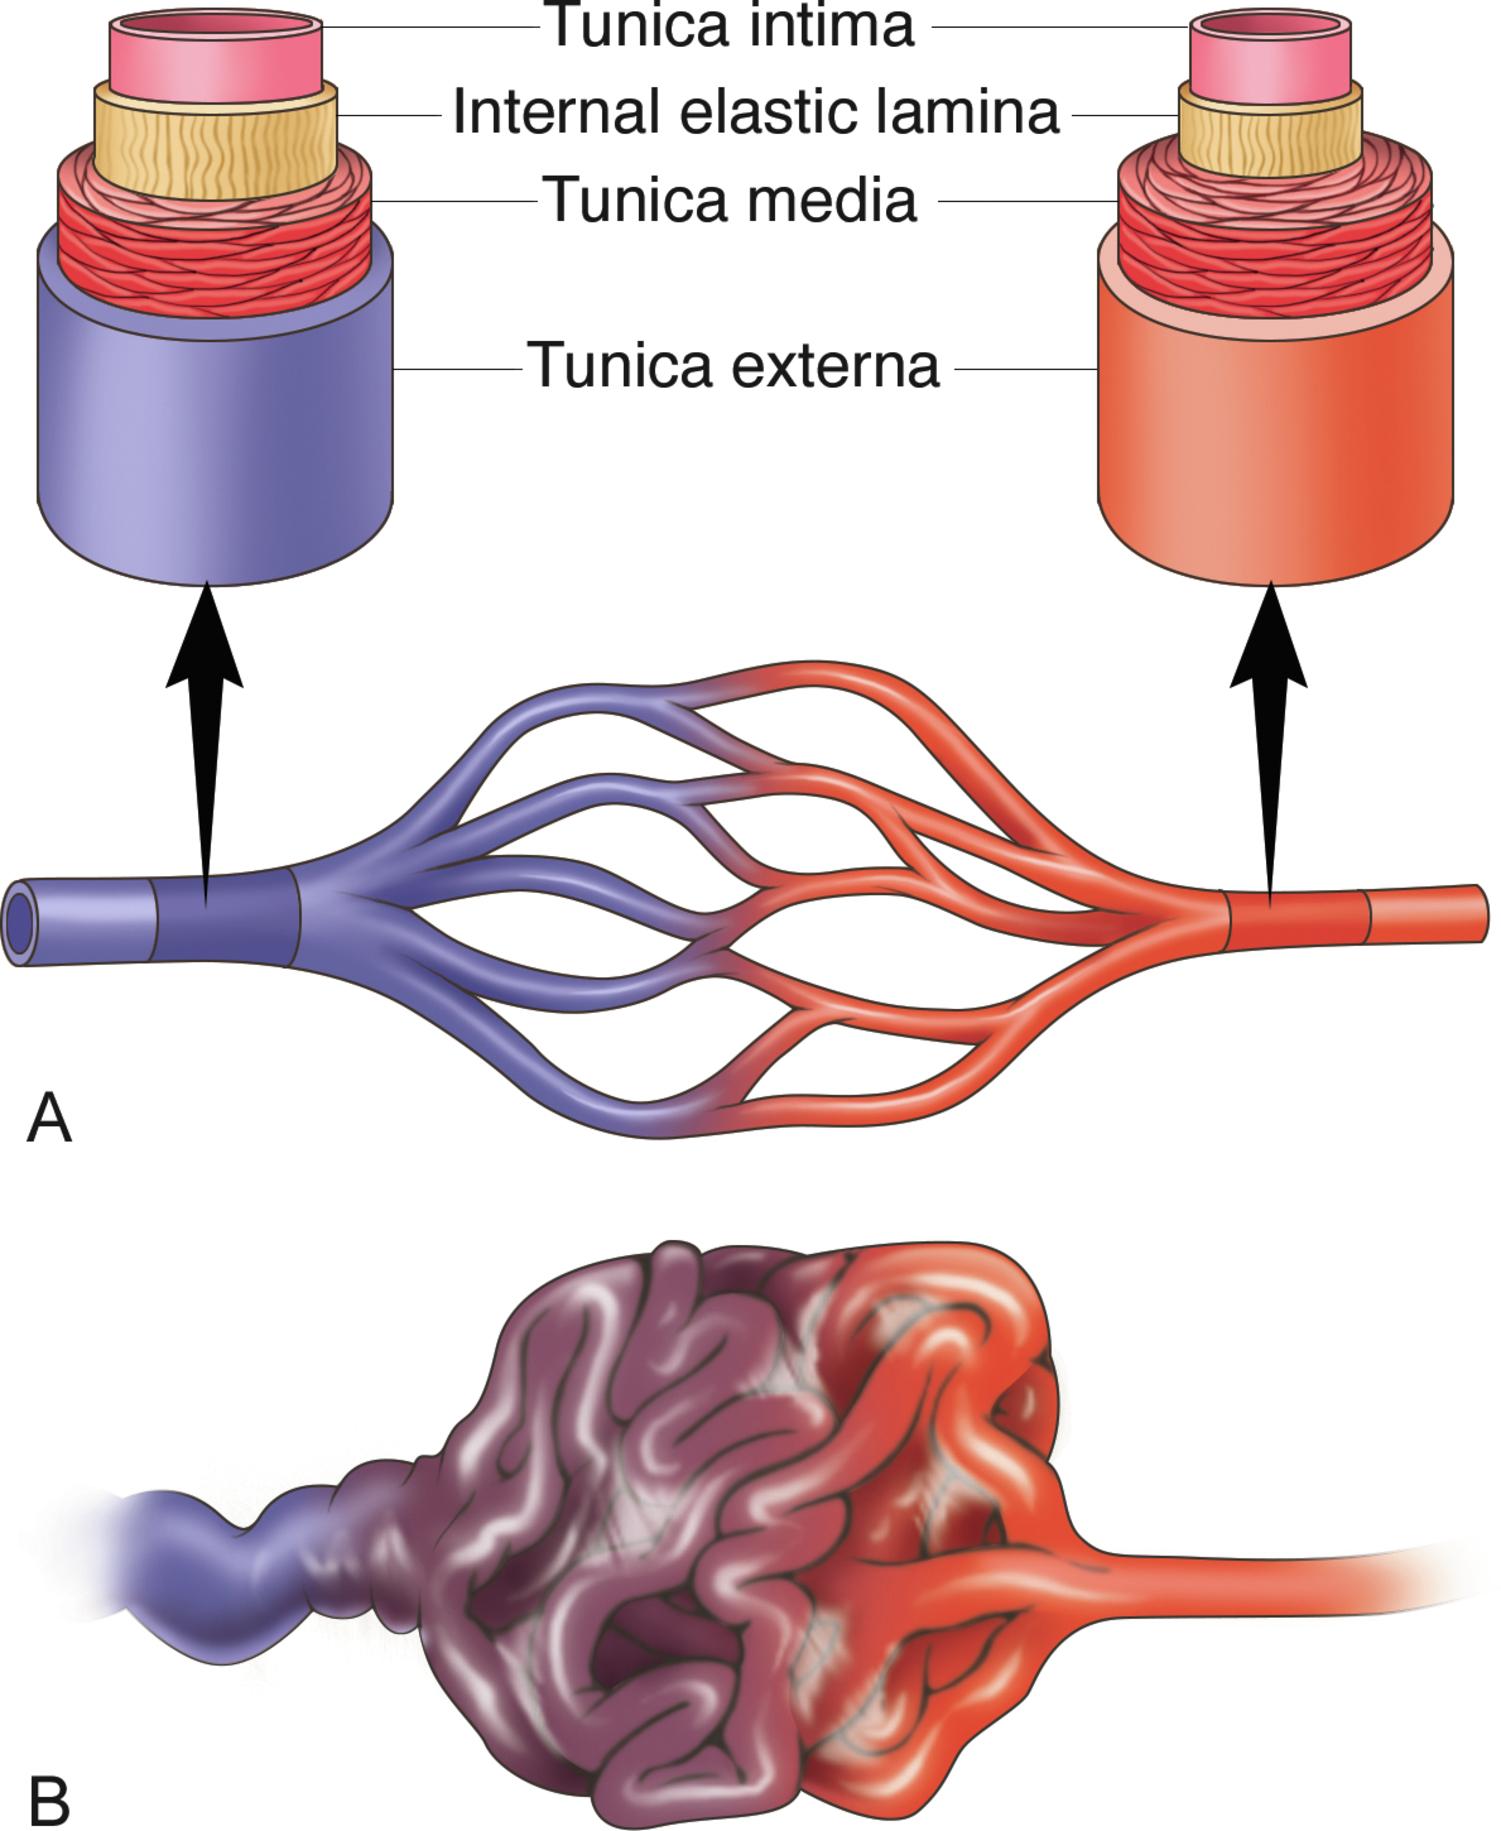 Fig. 1.2, Schematic illustration showing the difference between normal vascular architecture, with a capillary bed ( A ), and an AVM ( B ). Capillary beds are the primary sites of oxygen and nutrient exchange and are composed of a dense network of intercommunicating vessels that consist of specialized endothelial cells without smooth muscle cells. The walls of cerebral arteries and arterioles consist of three concentric layers. The innermost layer, the tunic intima, consists of a single layer of endothelial cells and the internal elastic lamina. The middle layer, the tunica media, contains mainly smooth muscle cells with some elastin and collagen fibers. The outermost layer, the tunica externa, is composed mainly of collagen fibers, fibroblasts, and associated cells, including perivascular nerves. The walls of cerebral veins are much thinner than arterial walls, lacking smooth muscle. In contrast to peripheral veins, cerebral veins do not contain valves. In an iAVM, the loss of normal vascular organization at the subarteriolar level and the lack of a capillary bed result in abnormal arteriovenous shunting.